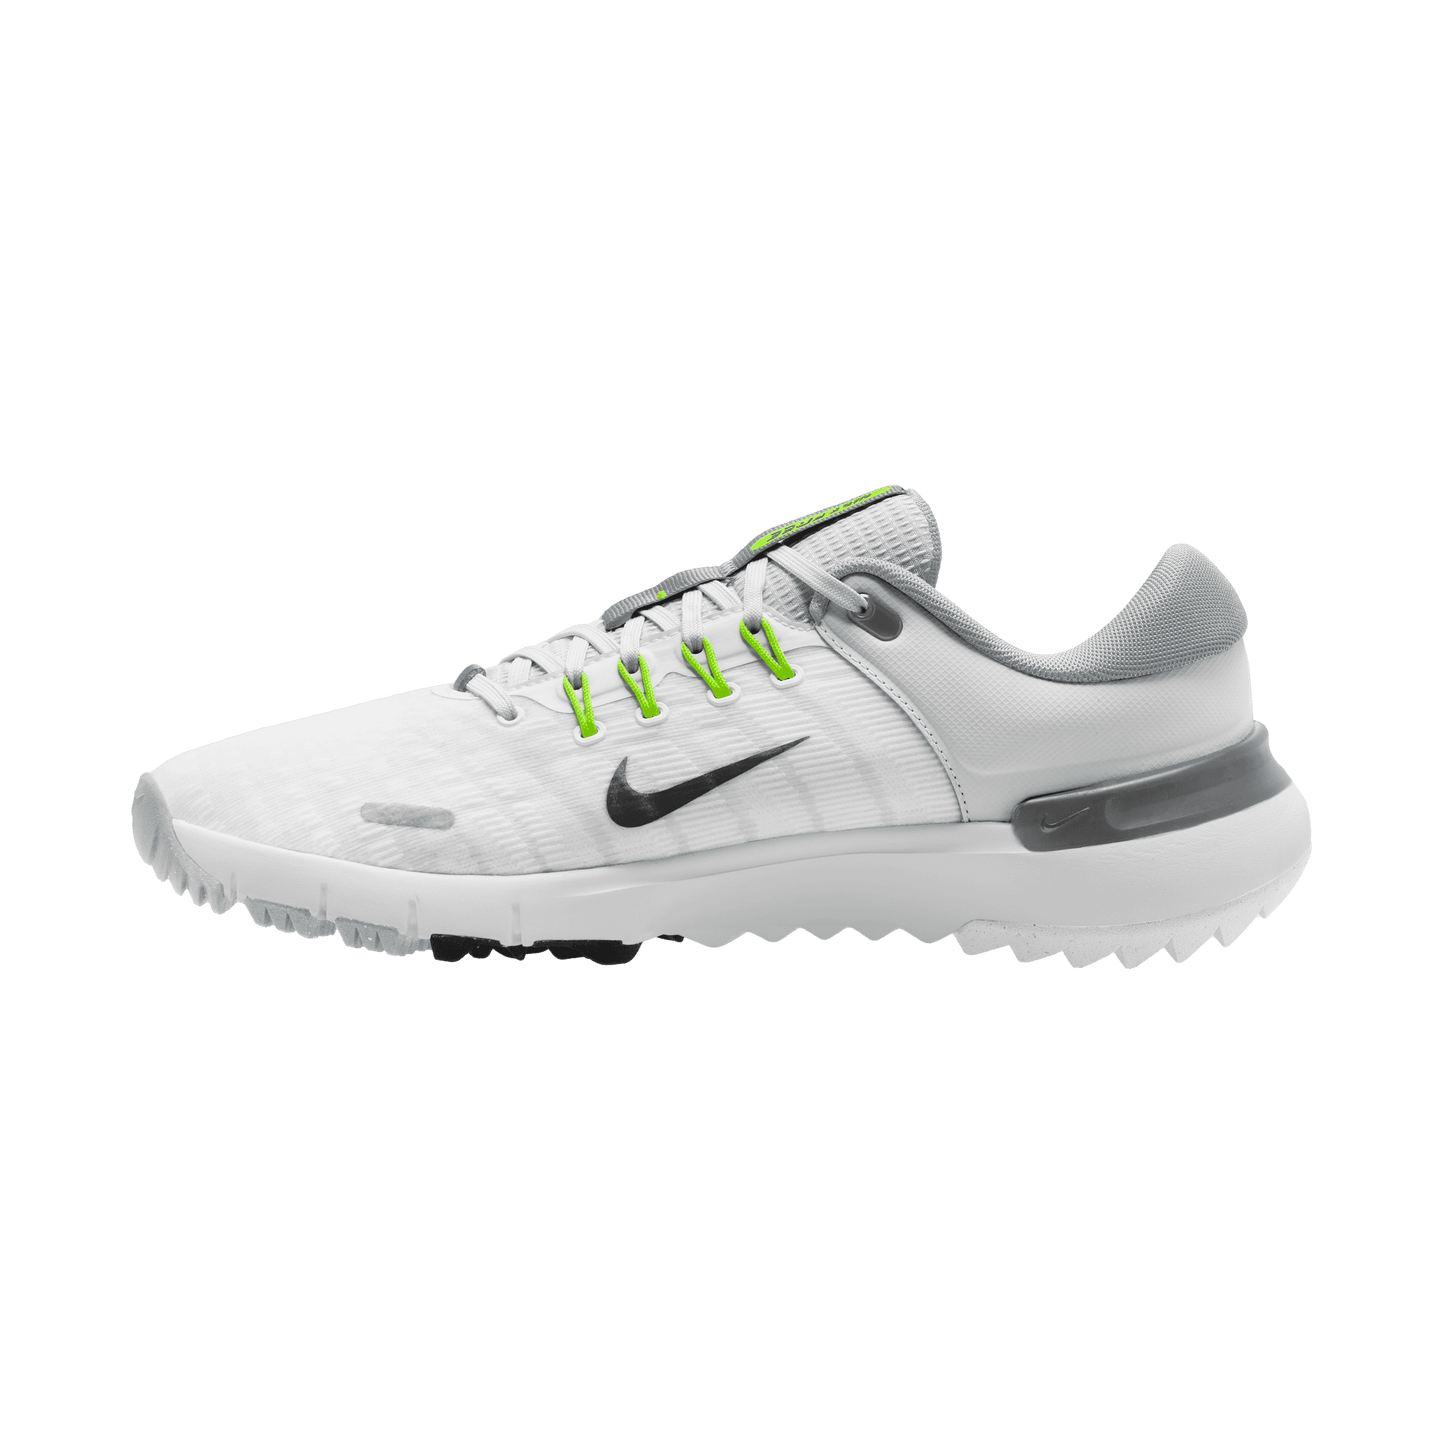 Nike Golf Free Mens Spikeless Golf Shoes FN0332 - 101   